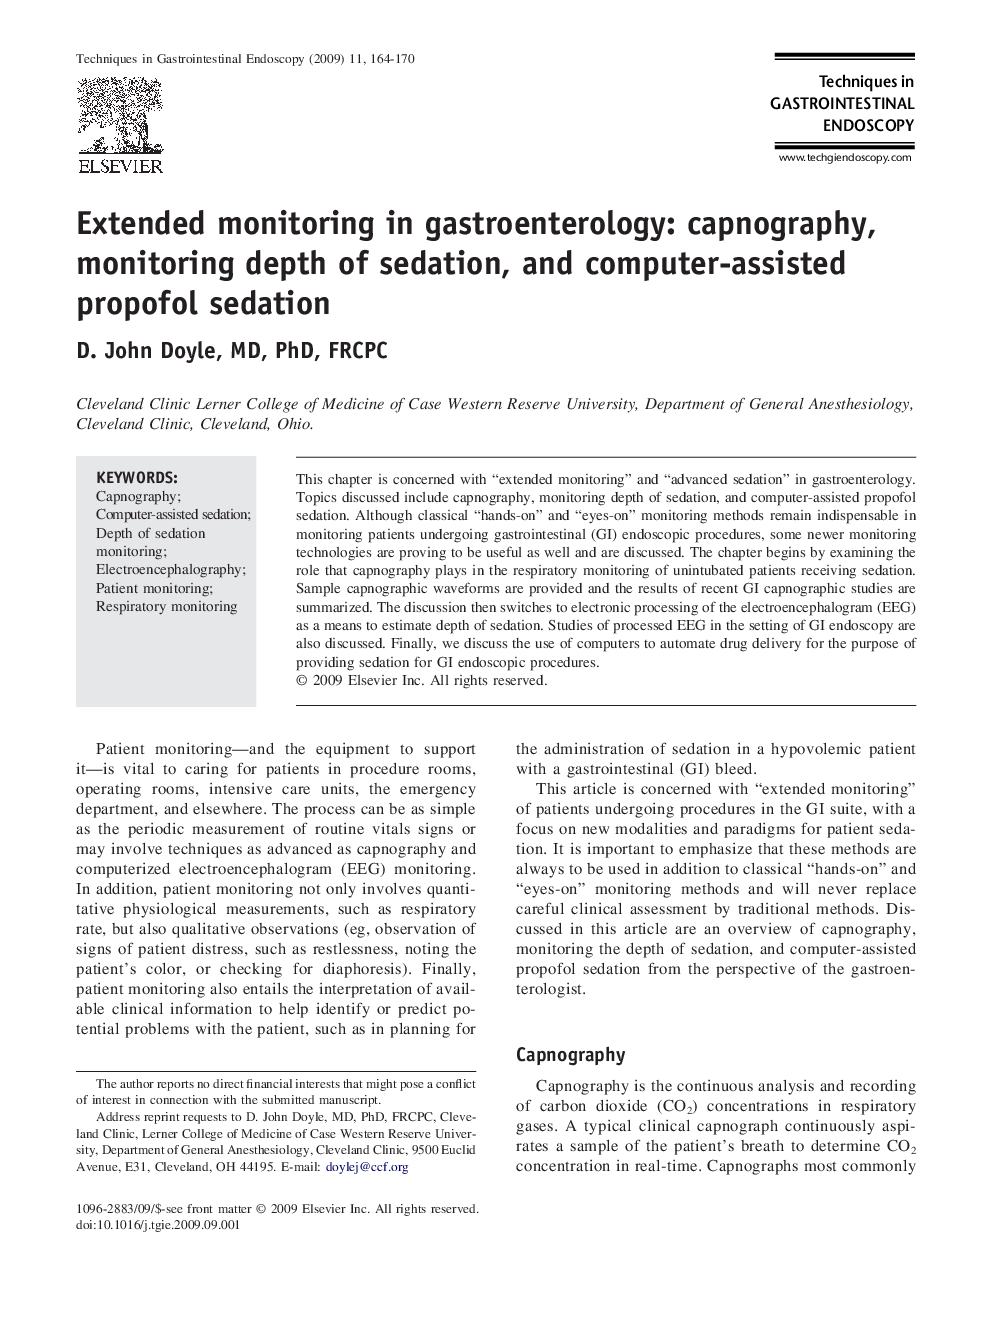 Extended monitoring in gastroenterology: capnography, monitoring depth of sedation, and computer-assisted propofol sedation 